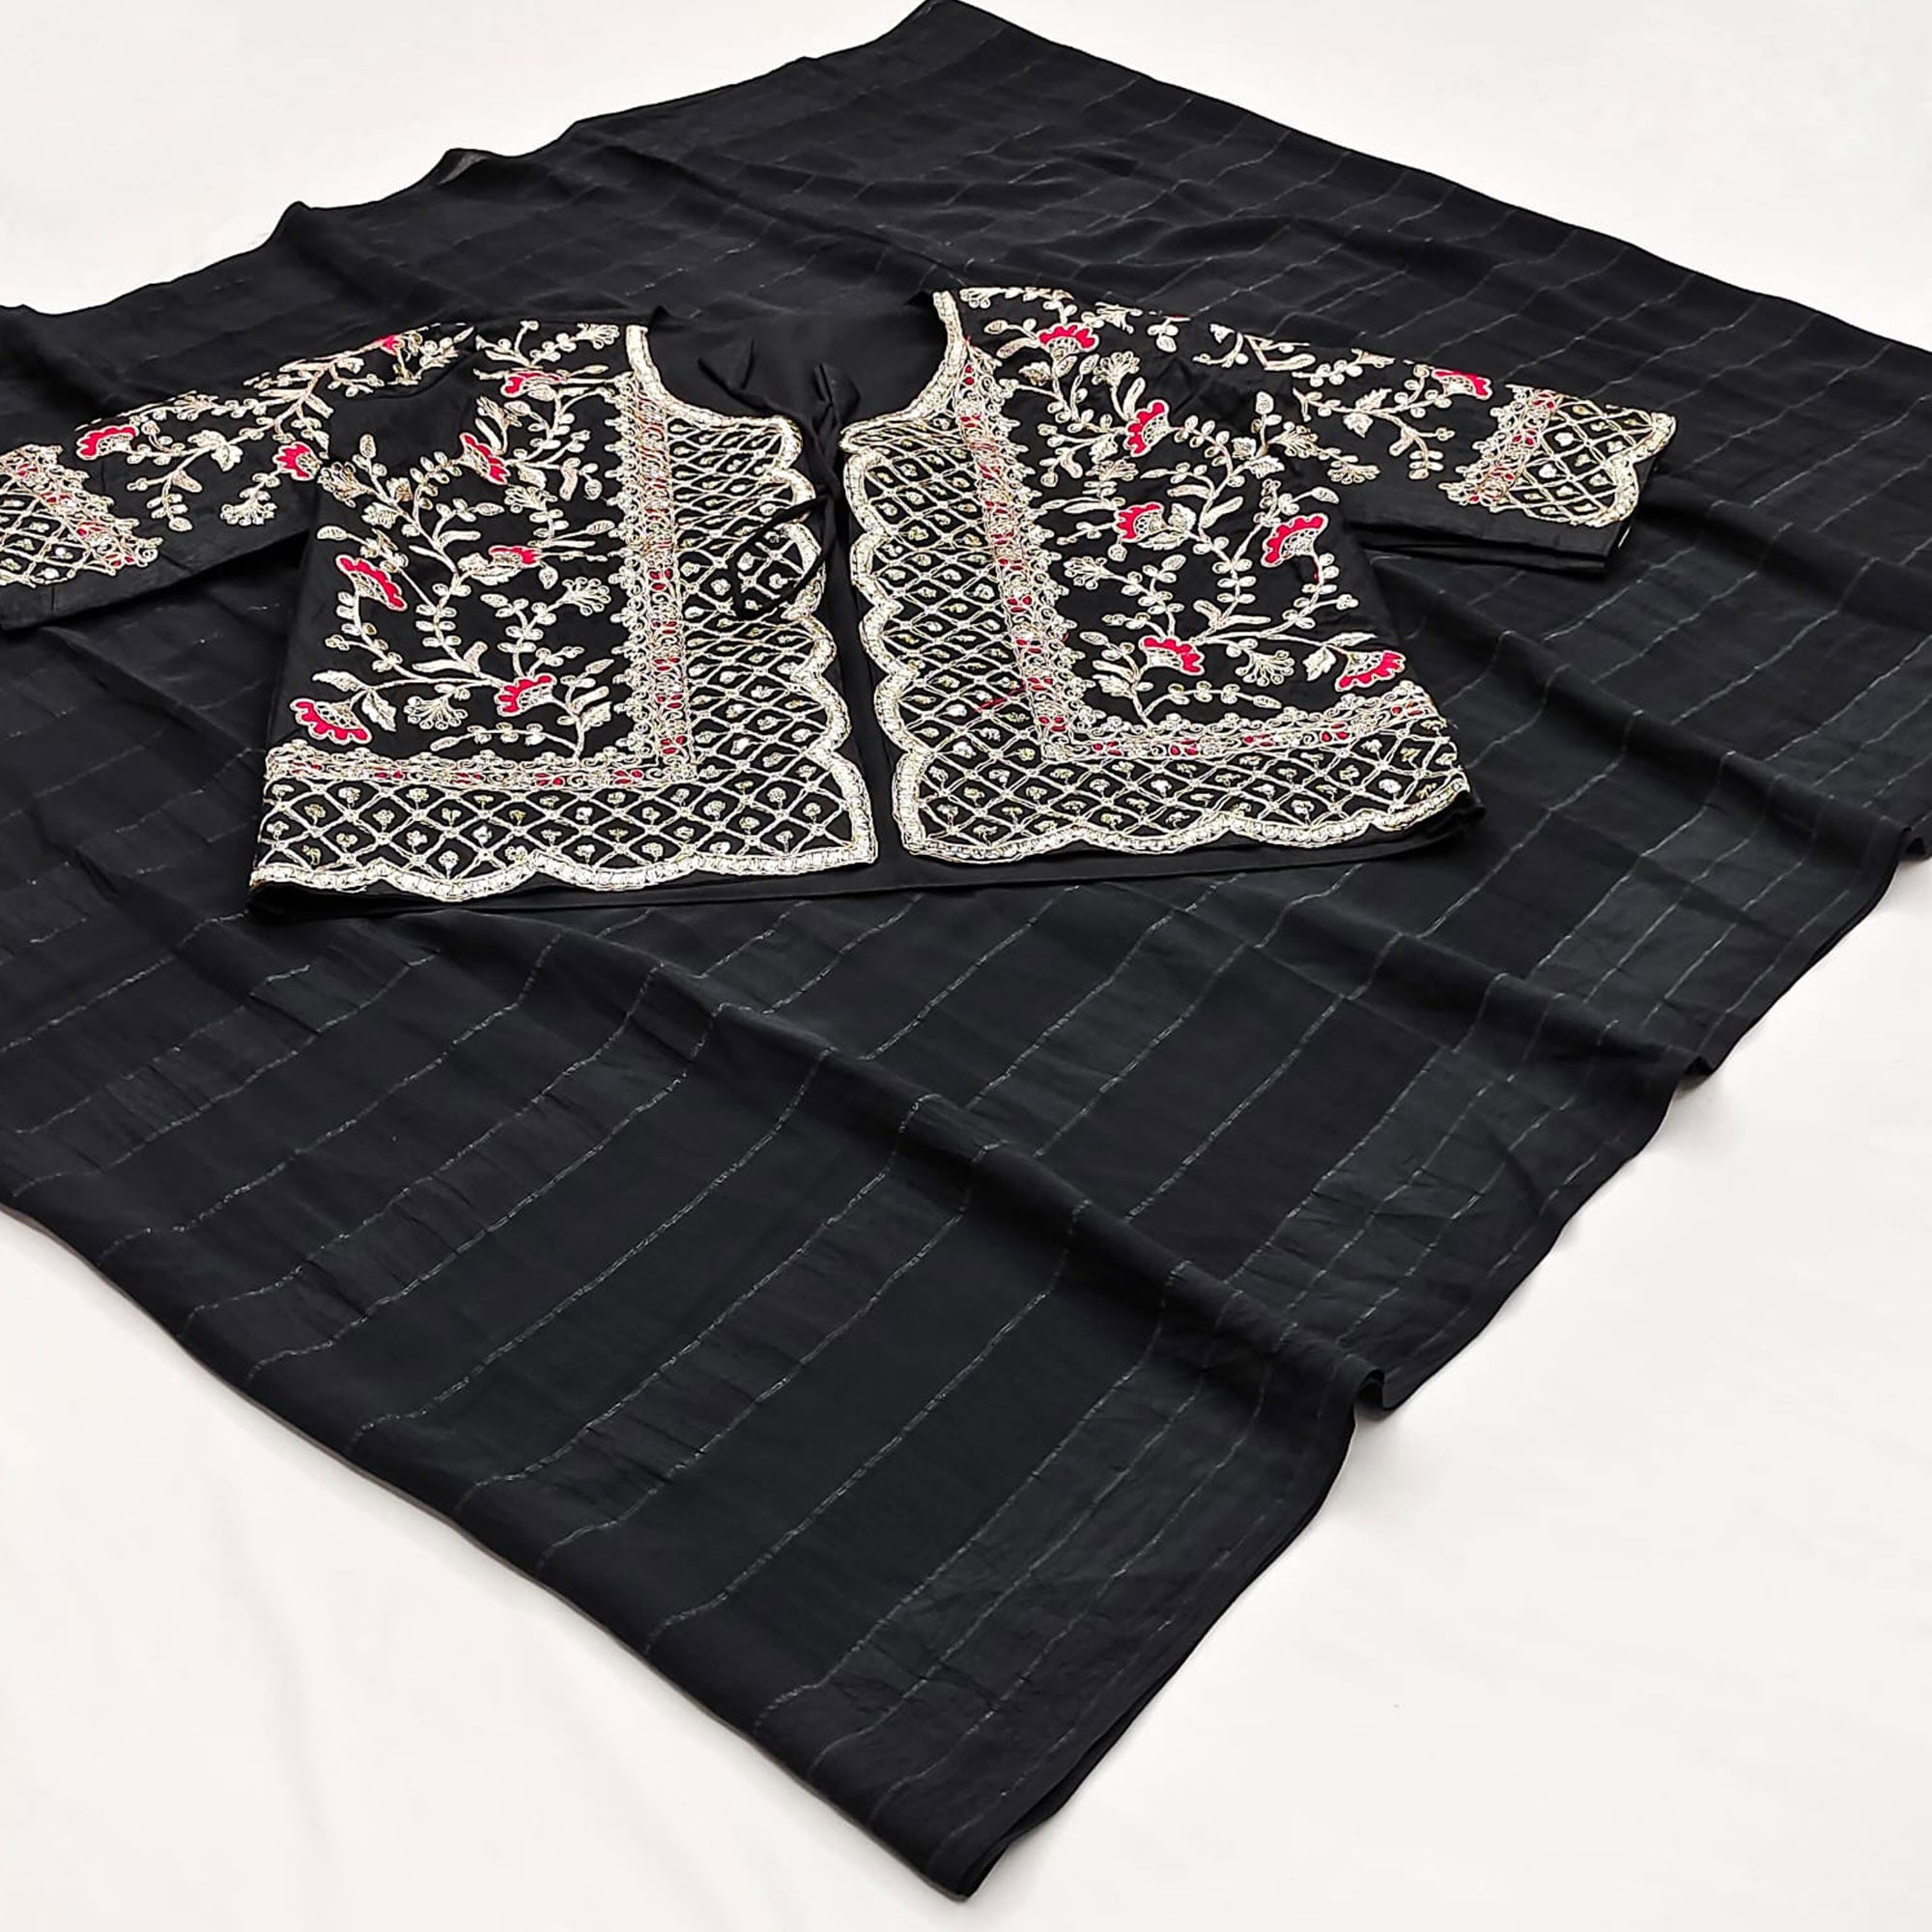 Black Woven Georgette Saree With Embroidered Jacket